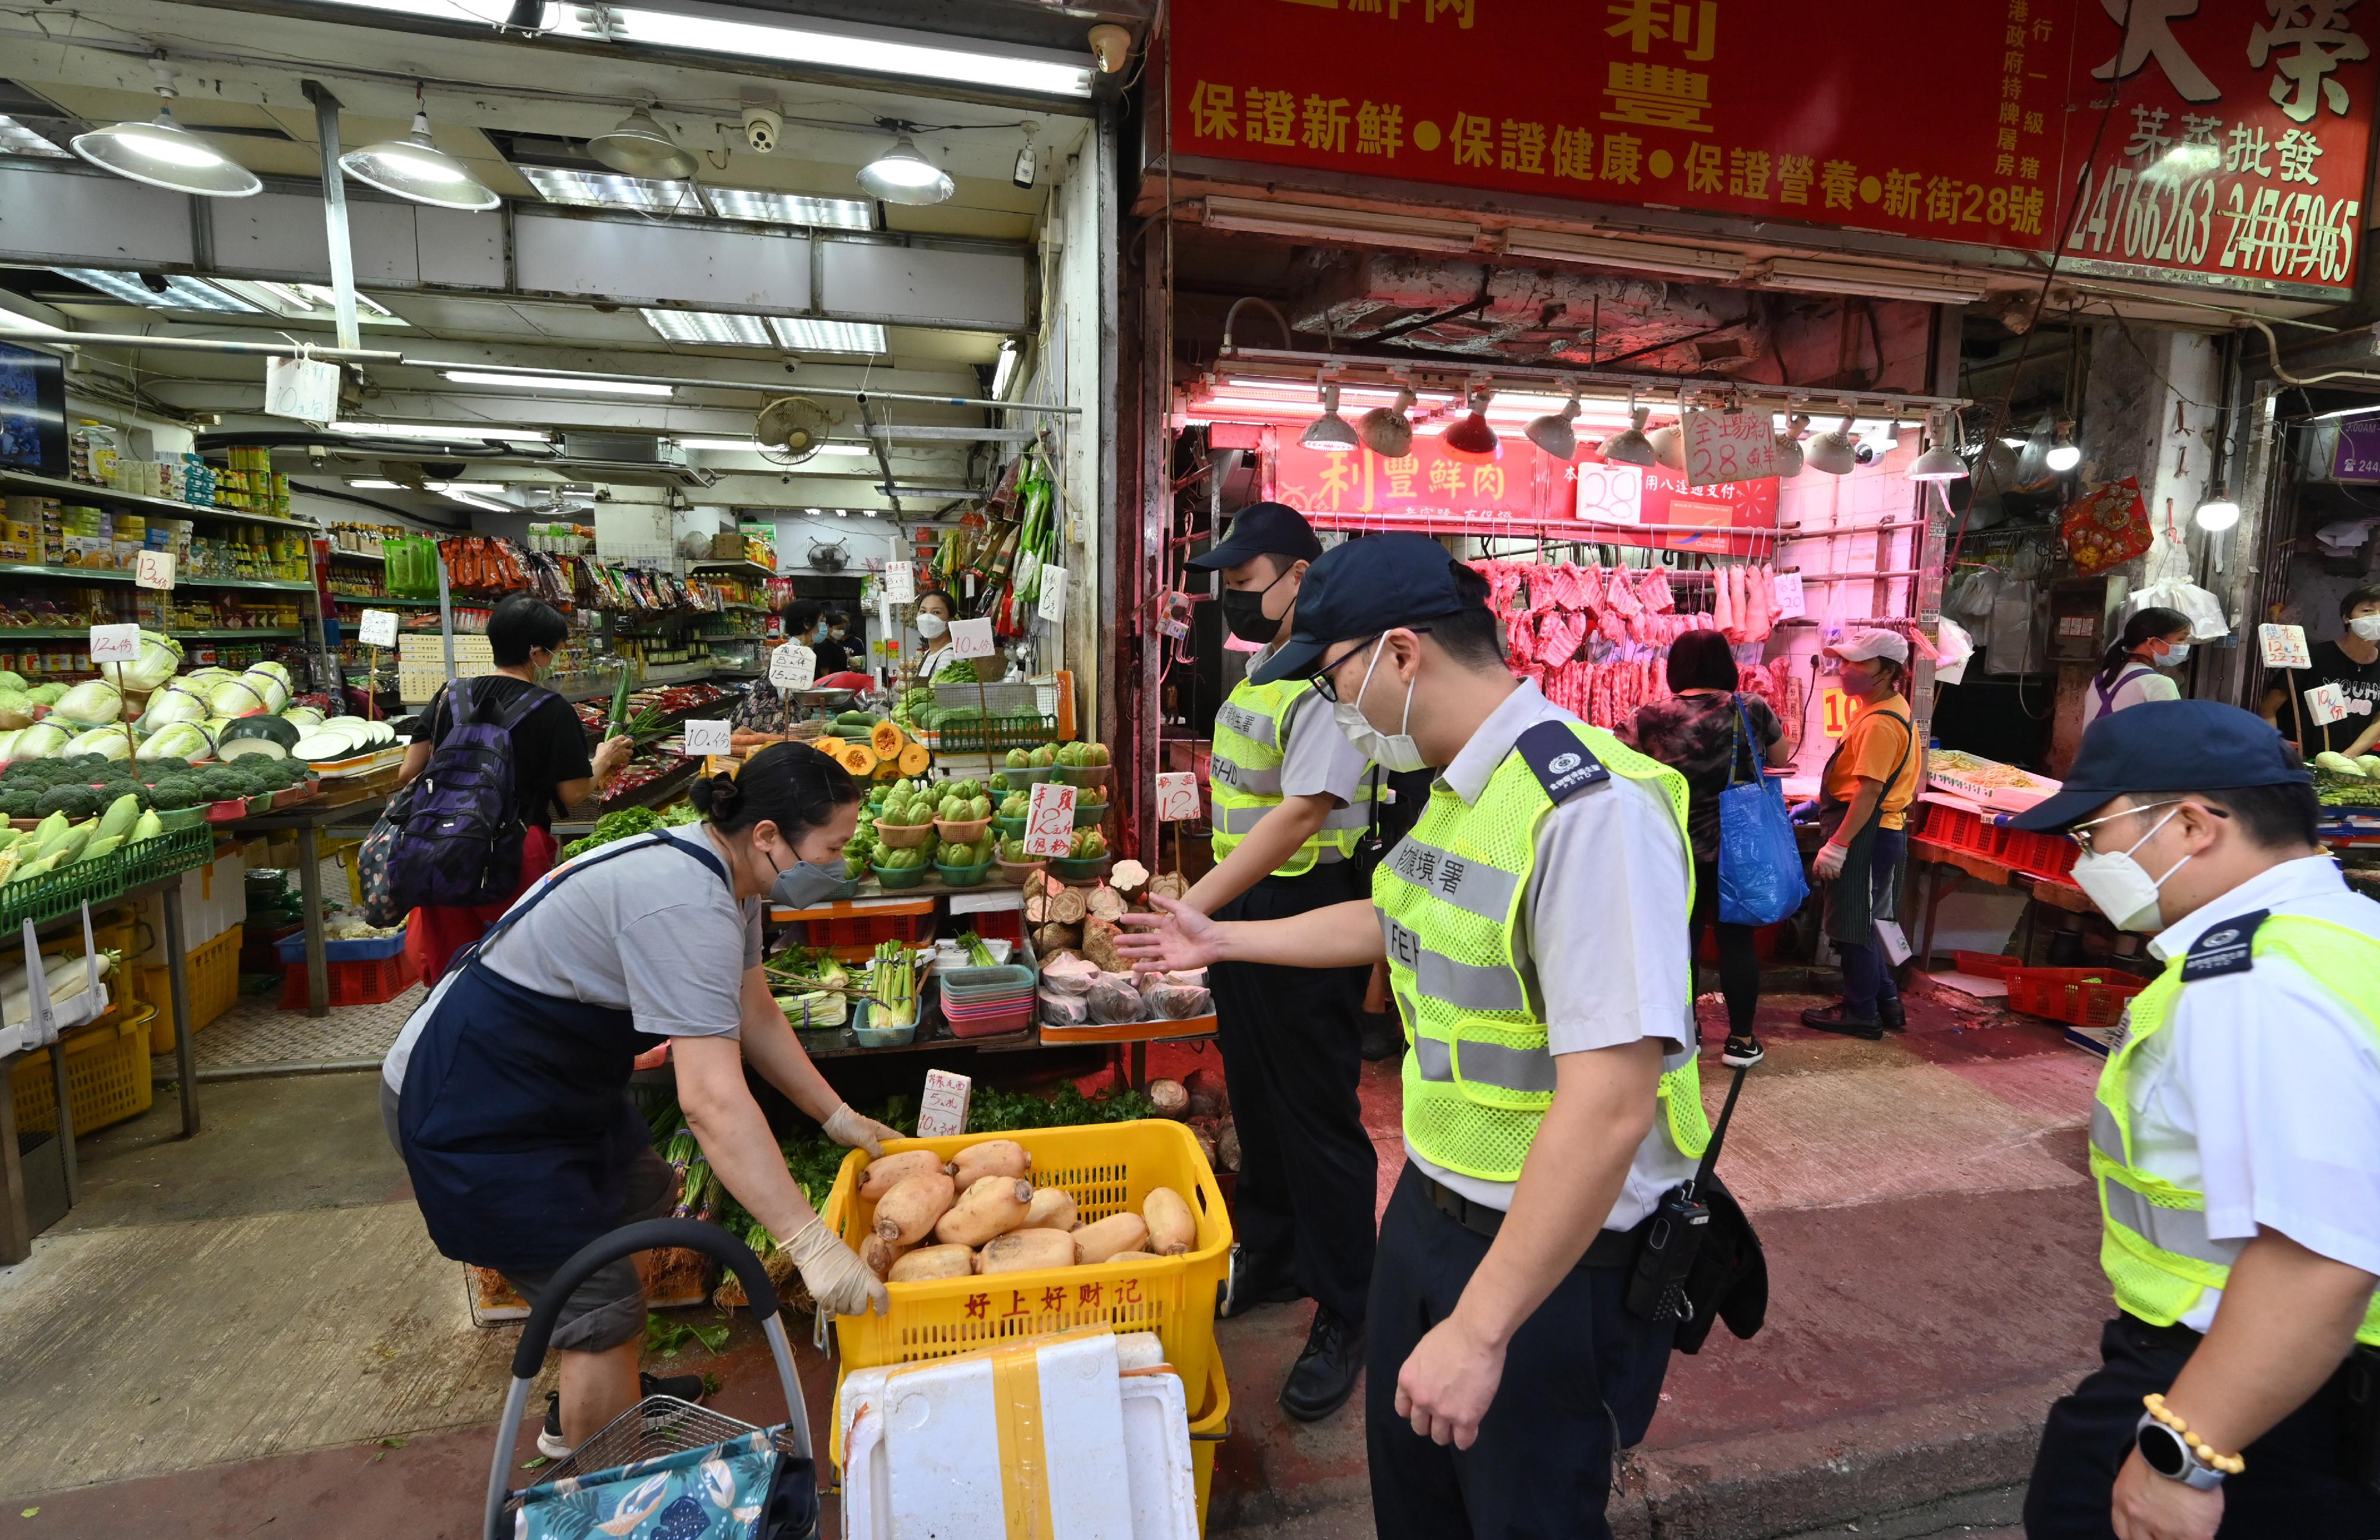 A spokesman for the Food and Environmental Hygiene Department (FEHD) said today (October 7) that the FEHD and the Hong Kong Police Force have started a series of stringent enforcement actions against illegal shop front extension activities in various districts since October 3. Photo shows officers of the FEHD during an operation in Yuen Long yesterday (October 6).